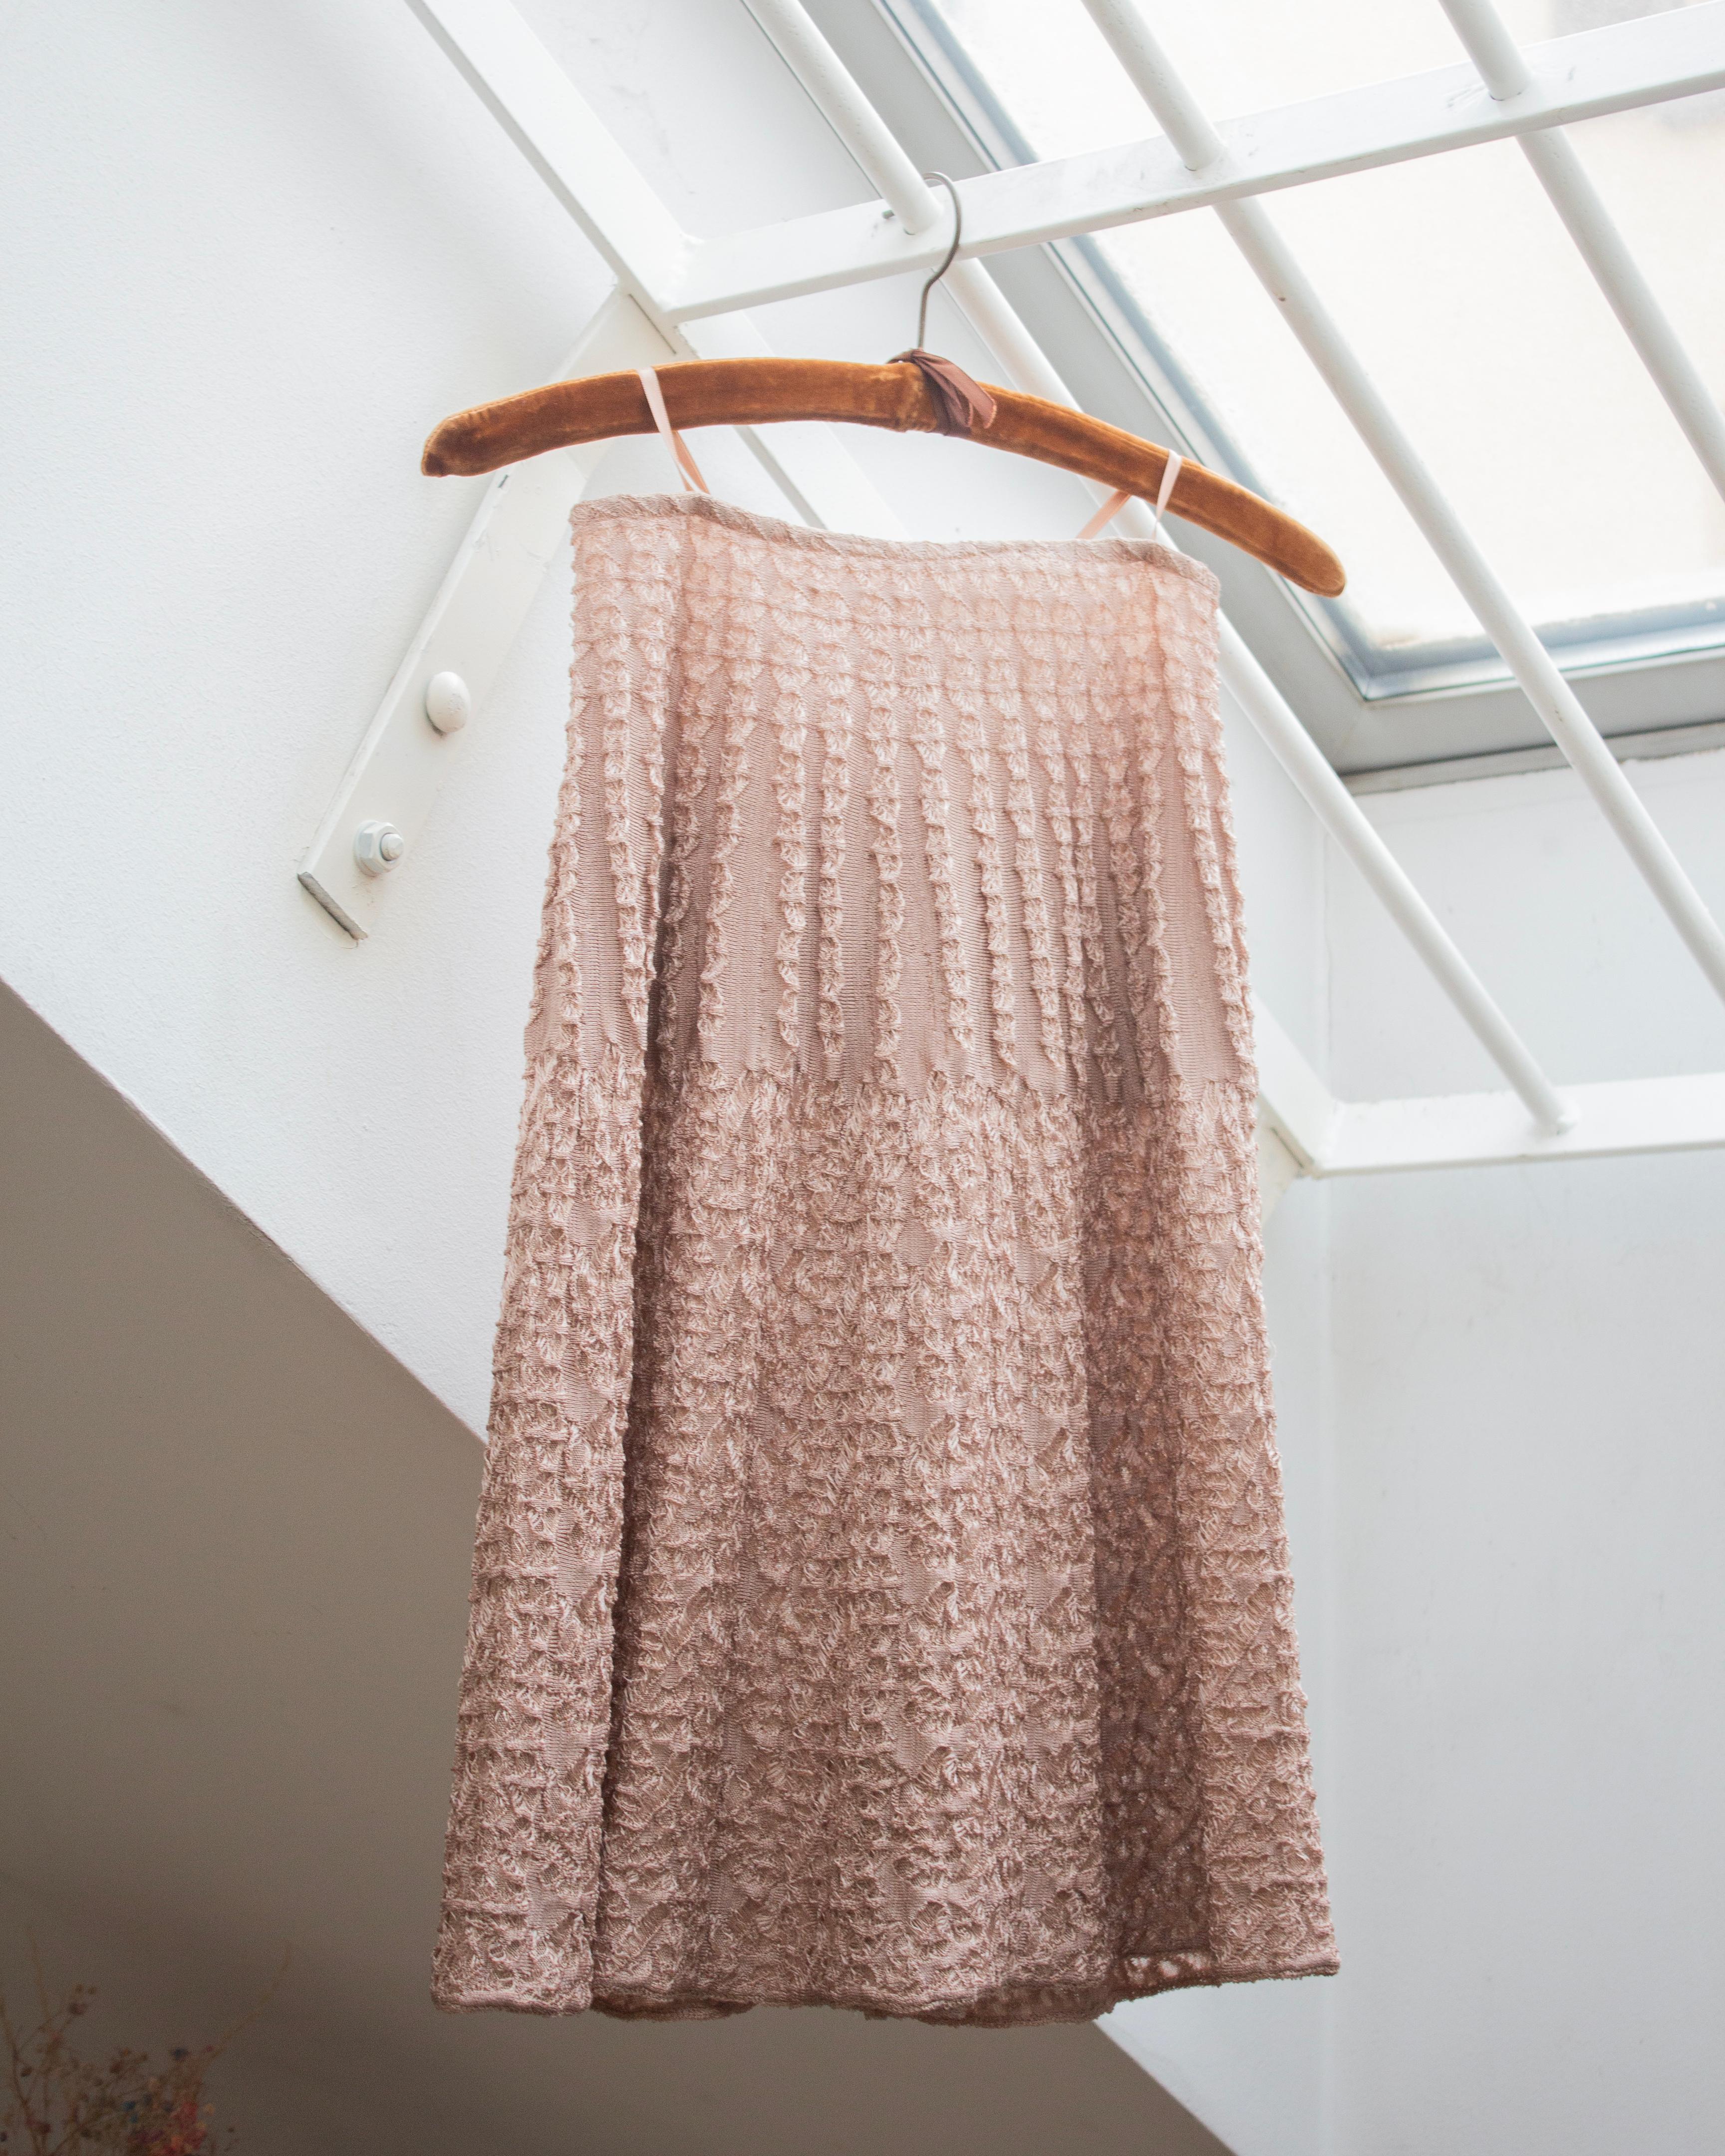 Alaïa Y2K nude pink knitted texturized viscose A line knee length flare skirt (XS)
Back zip and hook & eye closure 
Unlined 
95% viscose, 5% nylon
Size XS, check the measurements below
Very good vintage condition 

MEASUREMENTS (taken flat): 
Total